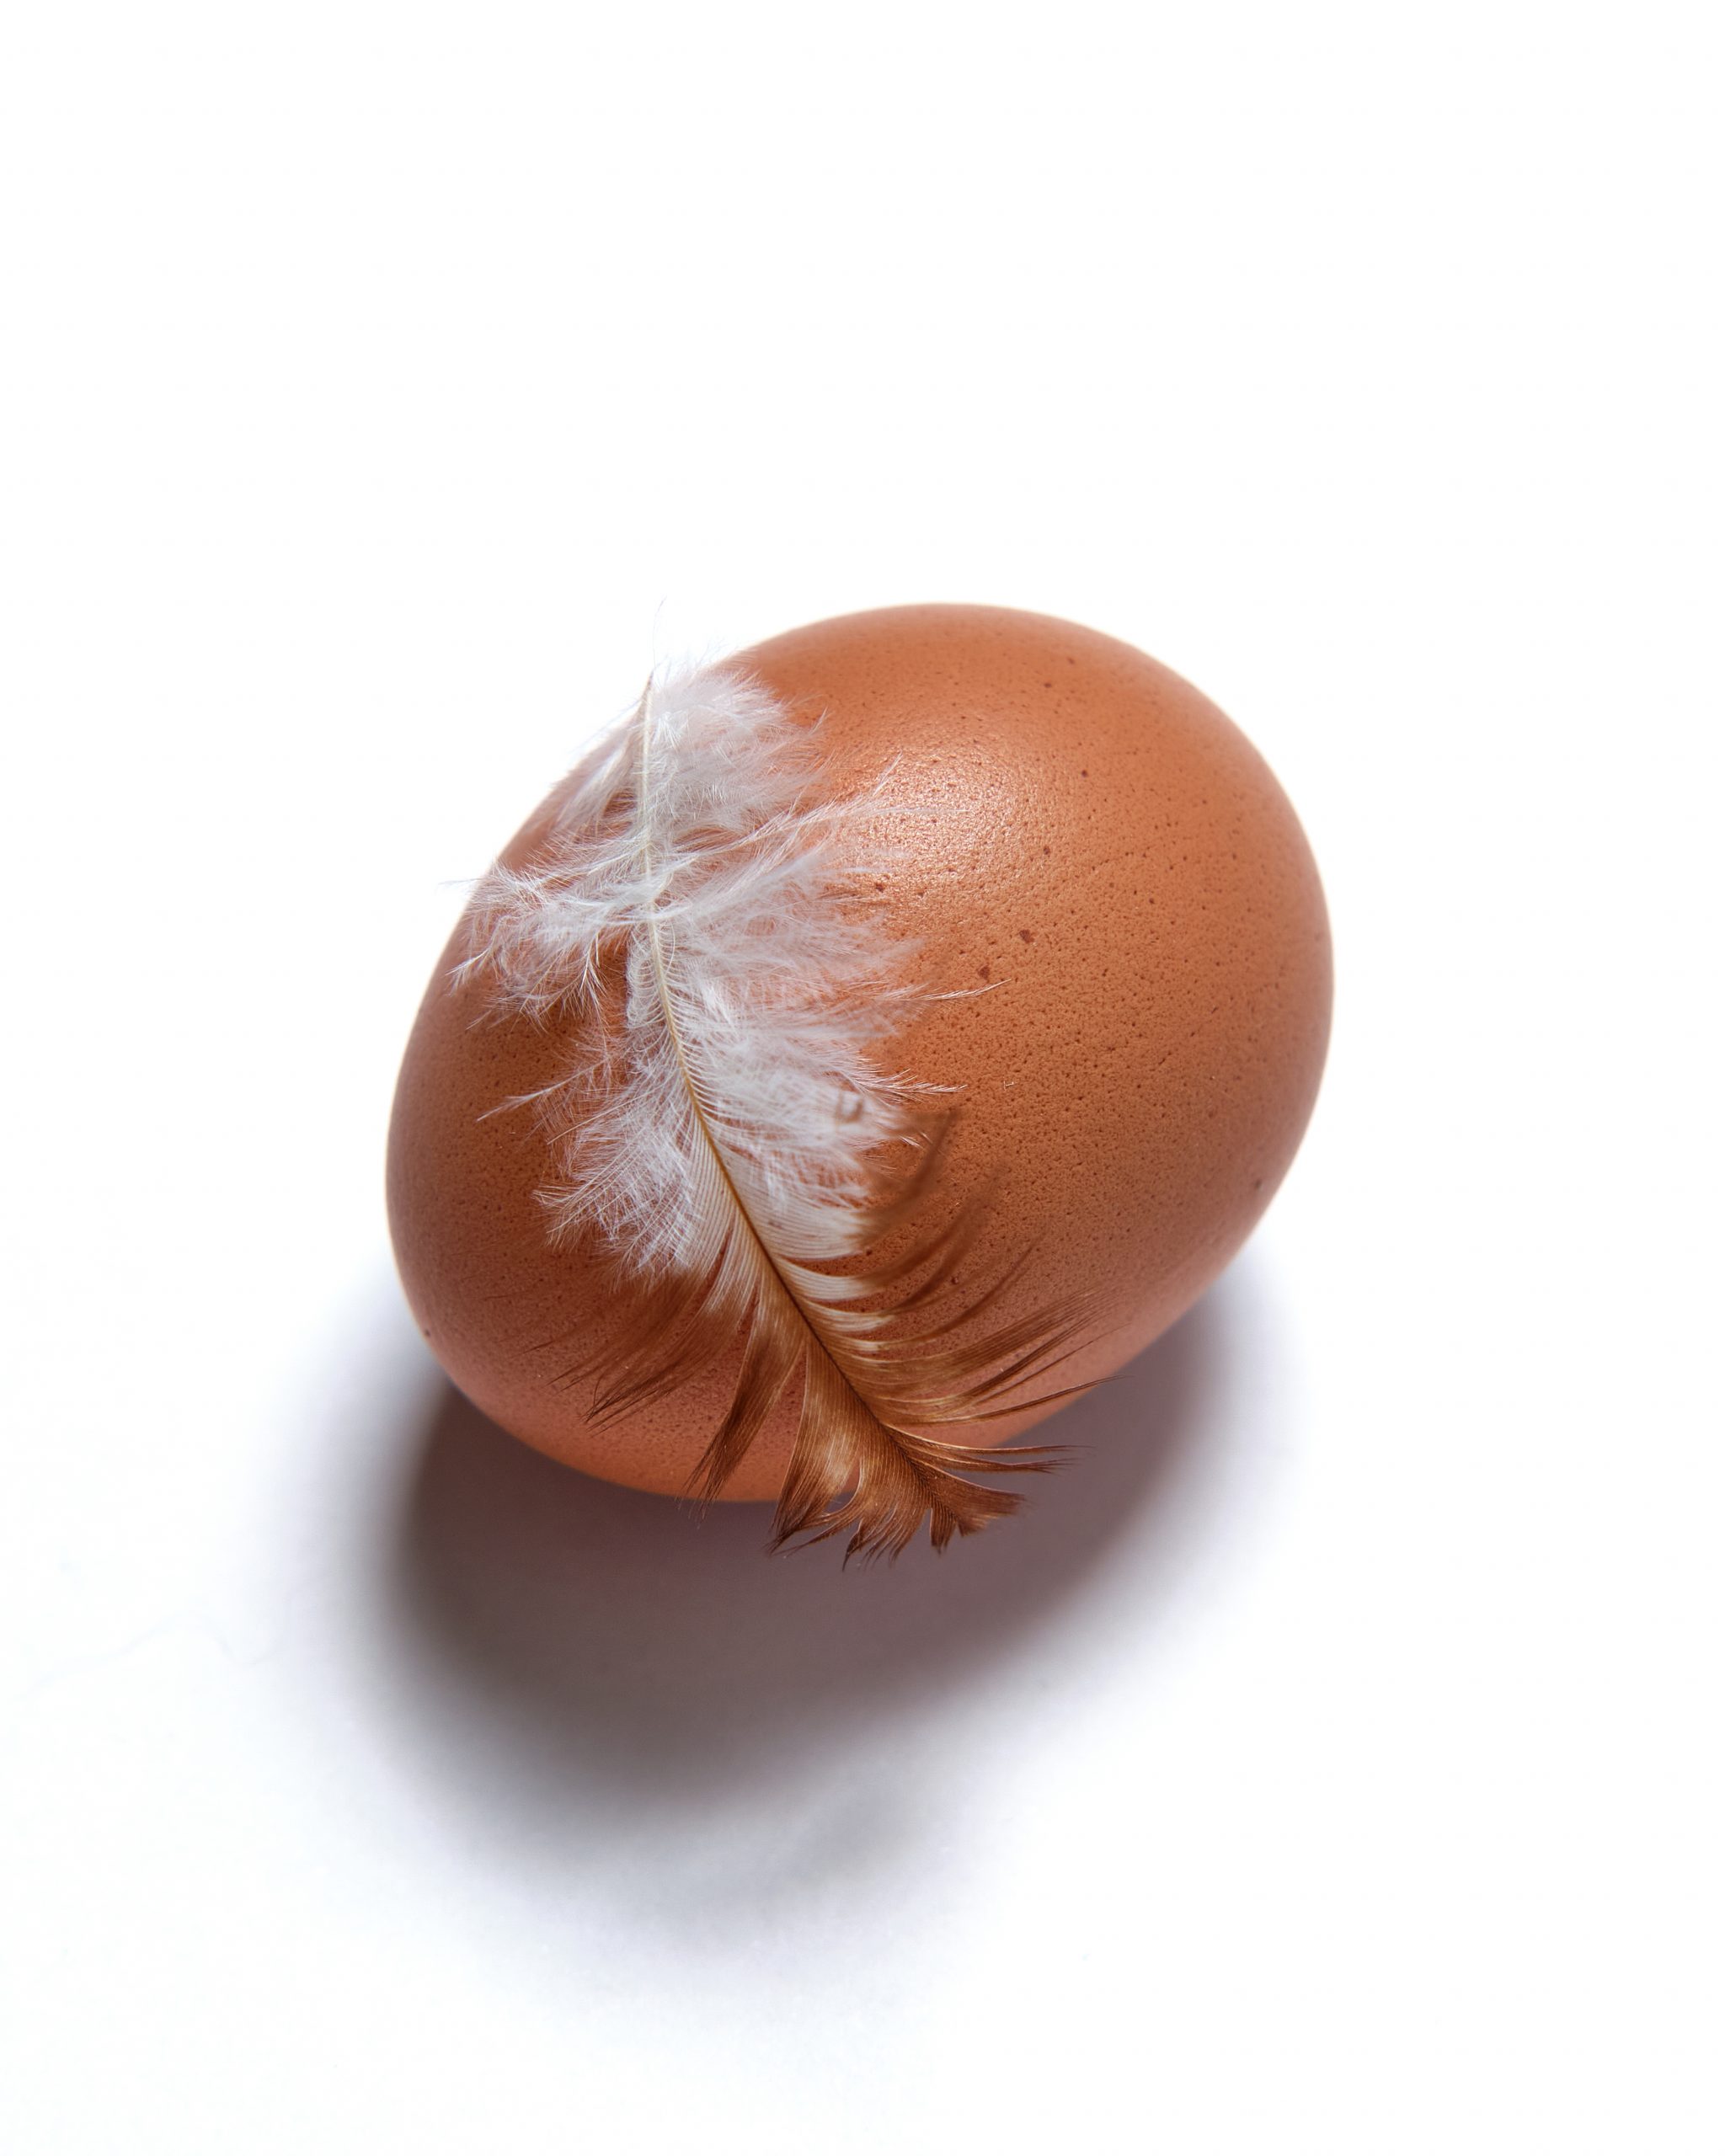 whole brown egg with a small white feather attached